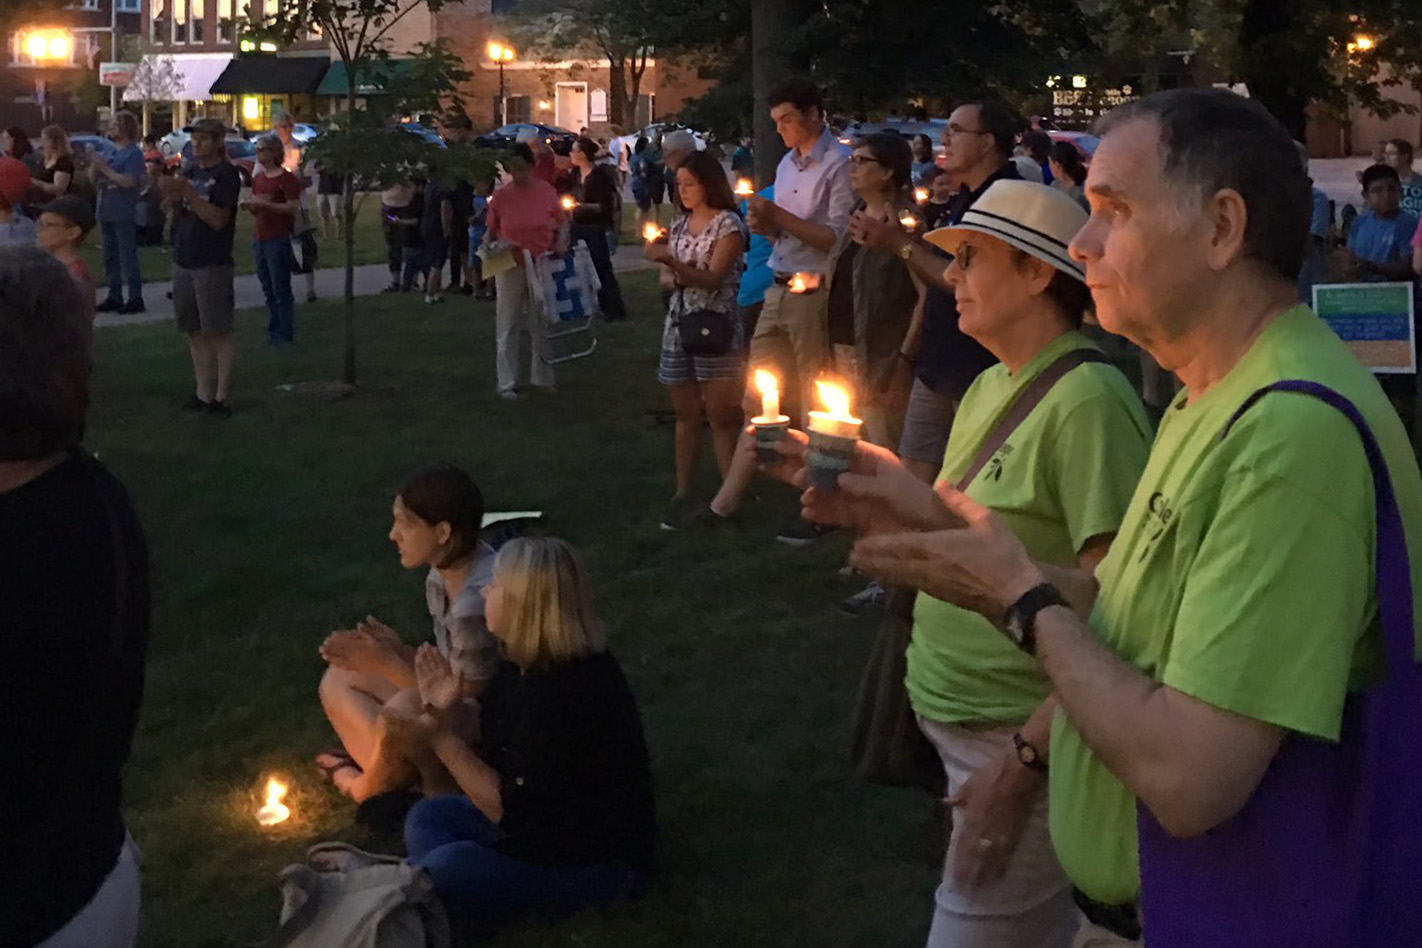 About 300 people joined a candlelight vigil in Goshen. (Tony Krabill/WVPE)